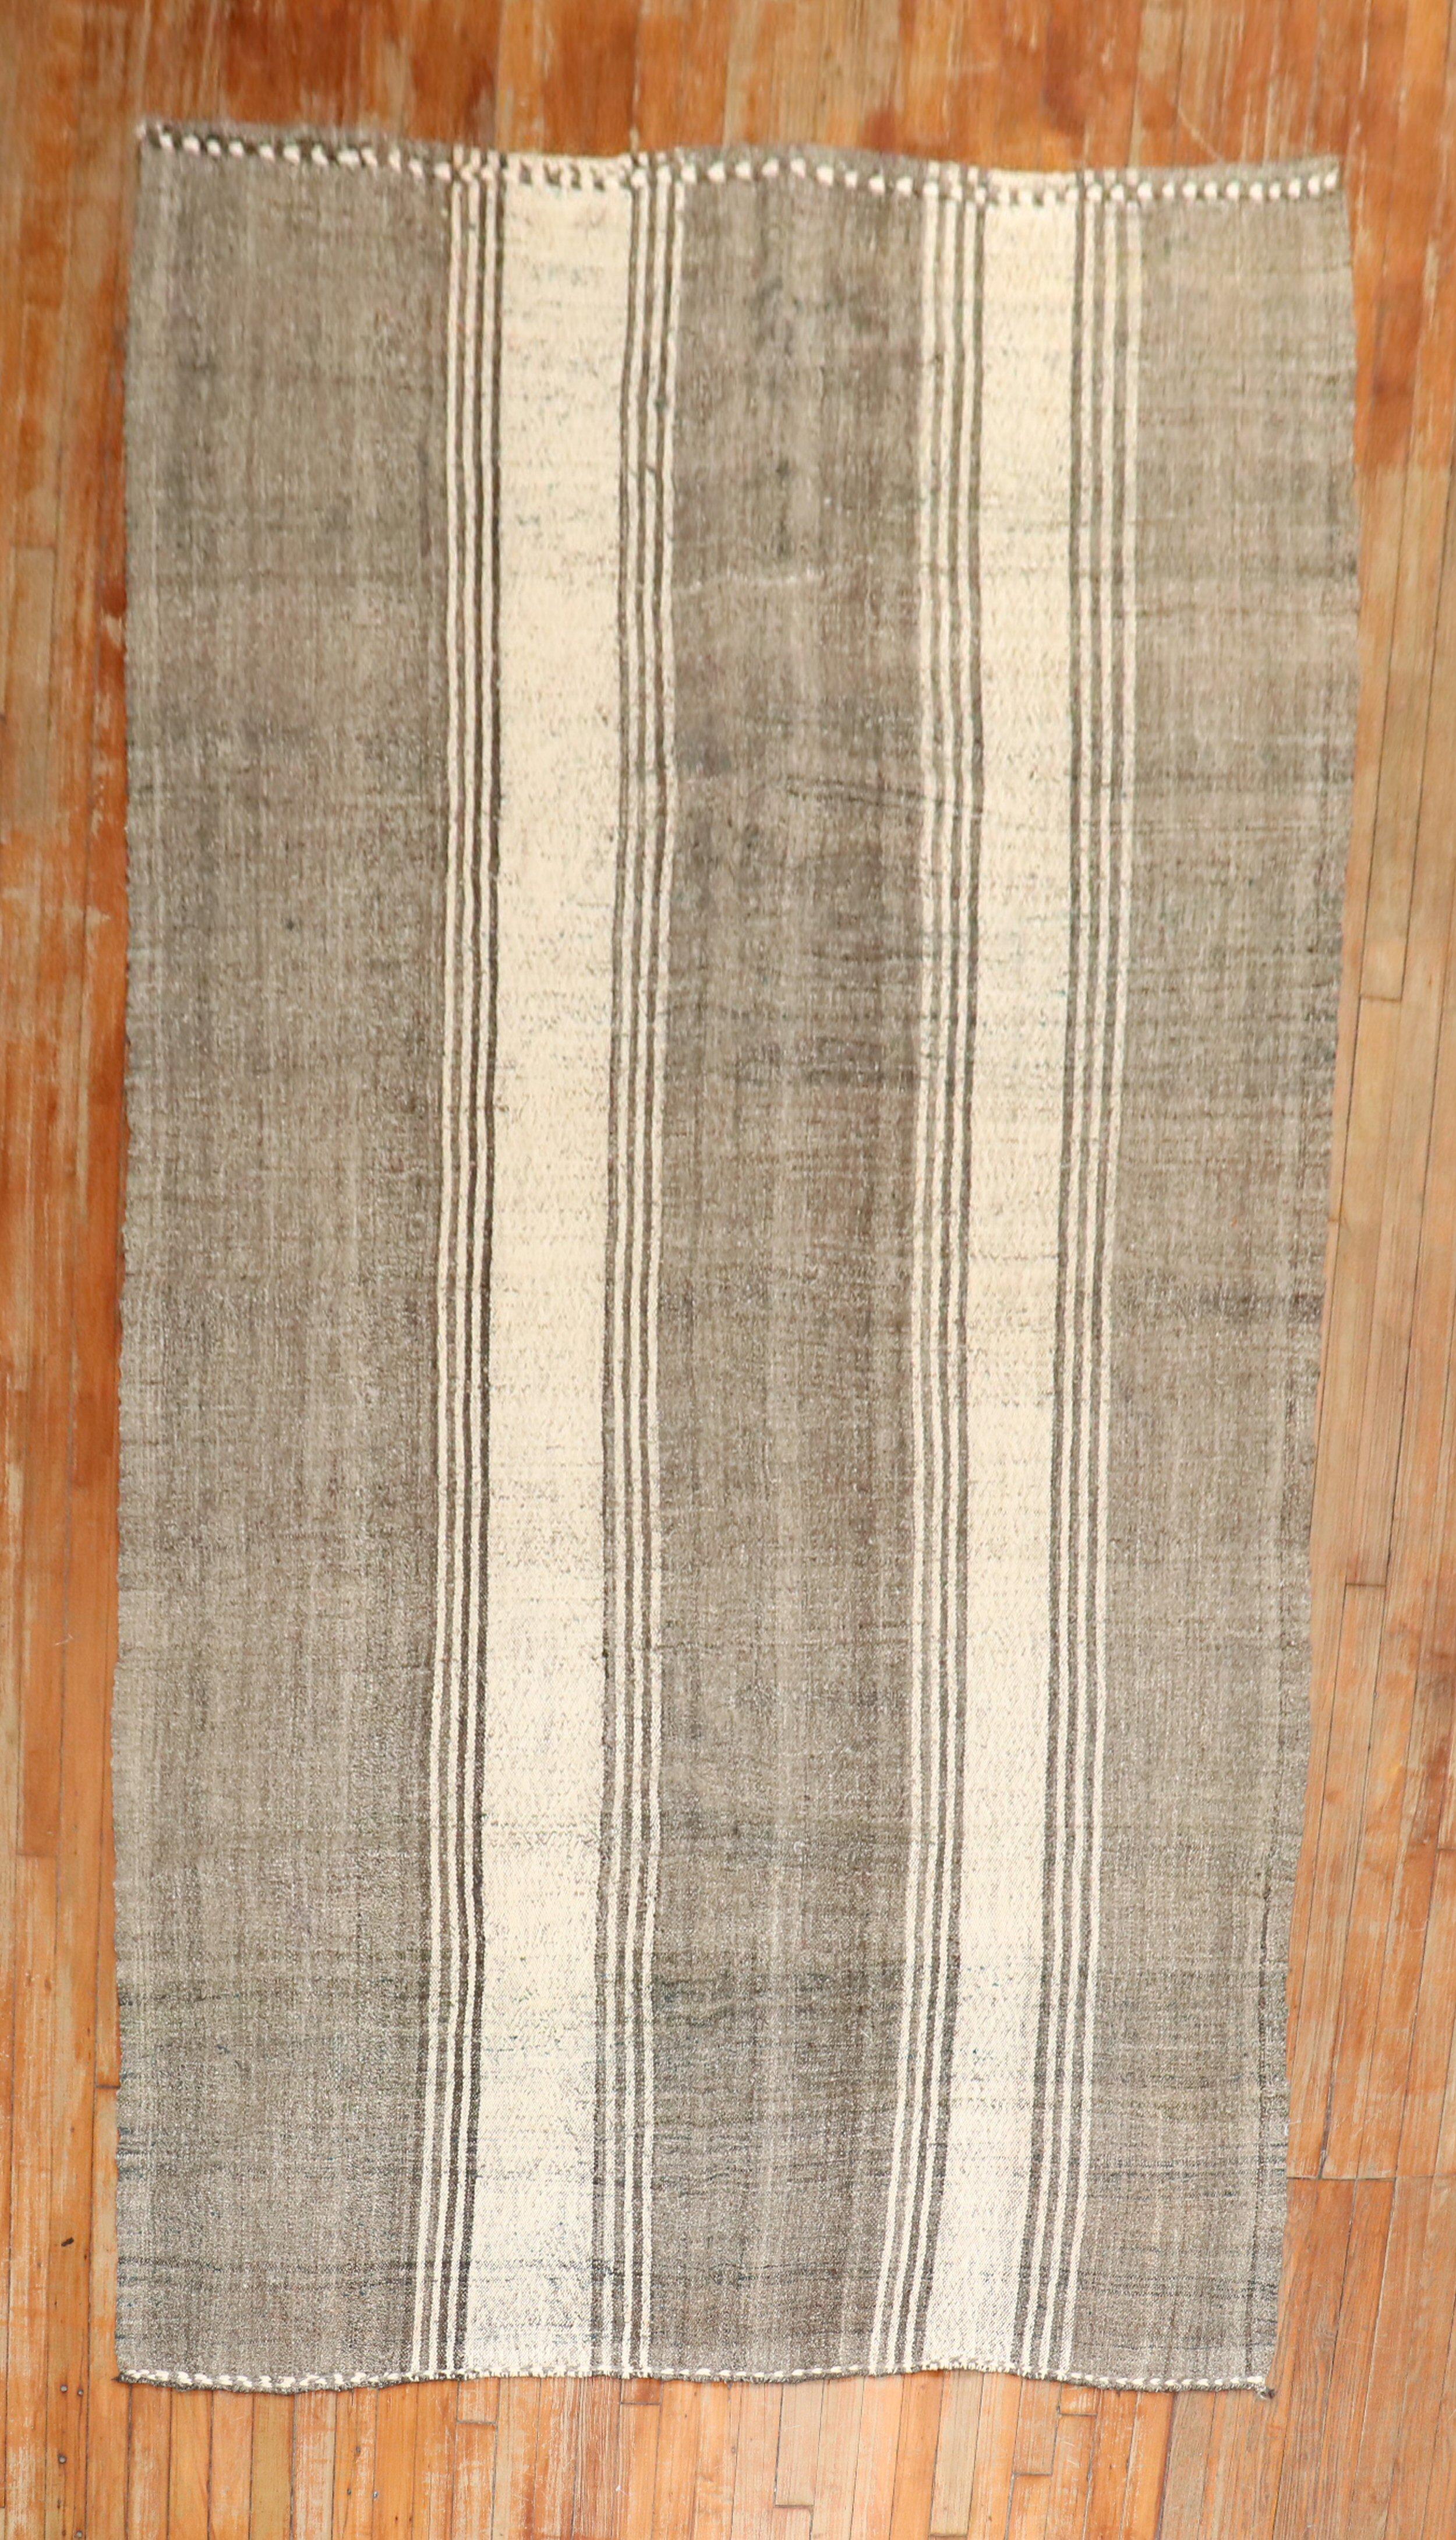 A gallery-size one-of-a-kind 3rd quarter of the 20th century Turkish Kilim in ivory and gray

Measures: 5'3'' x 10'4''.